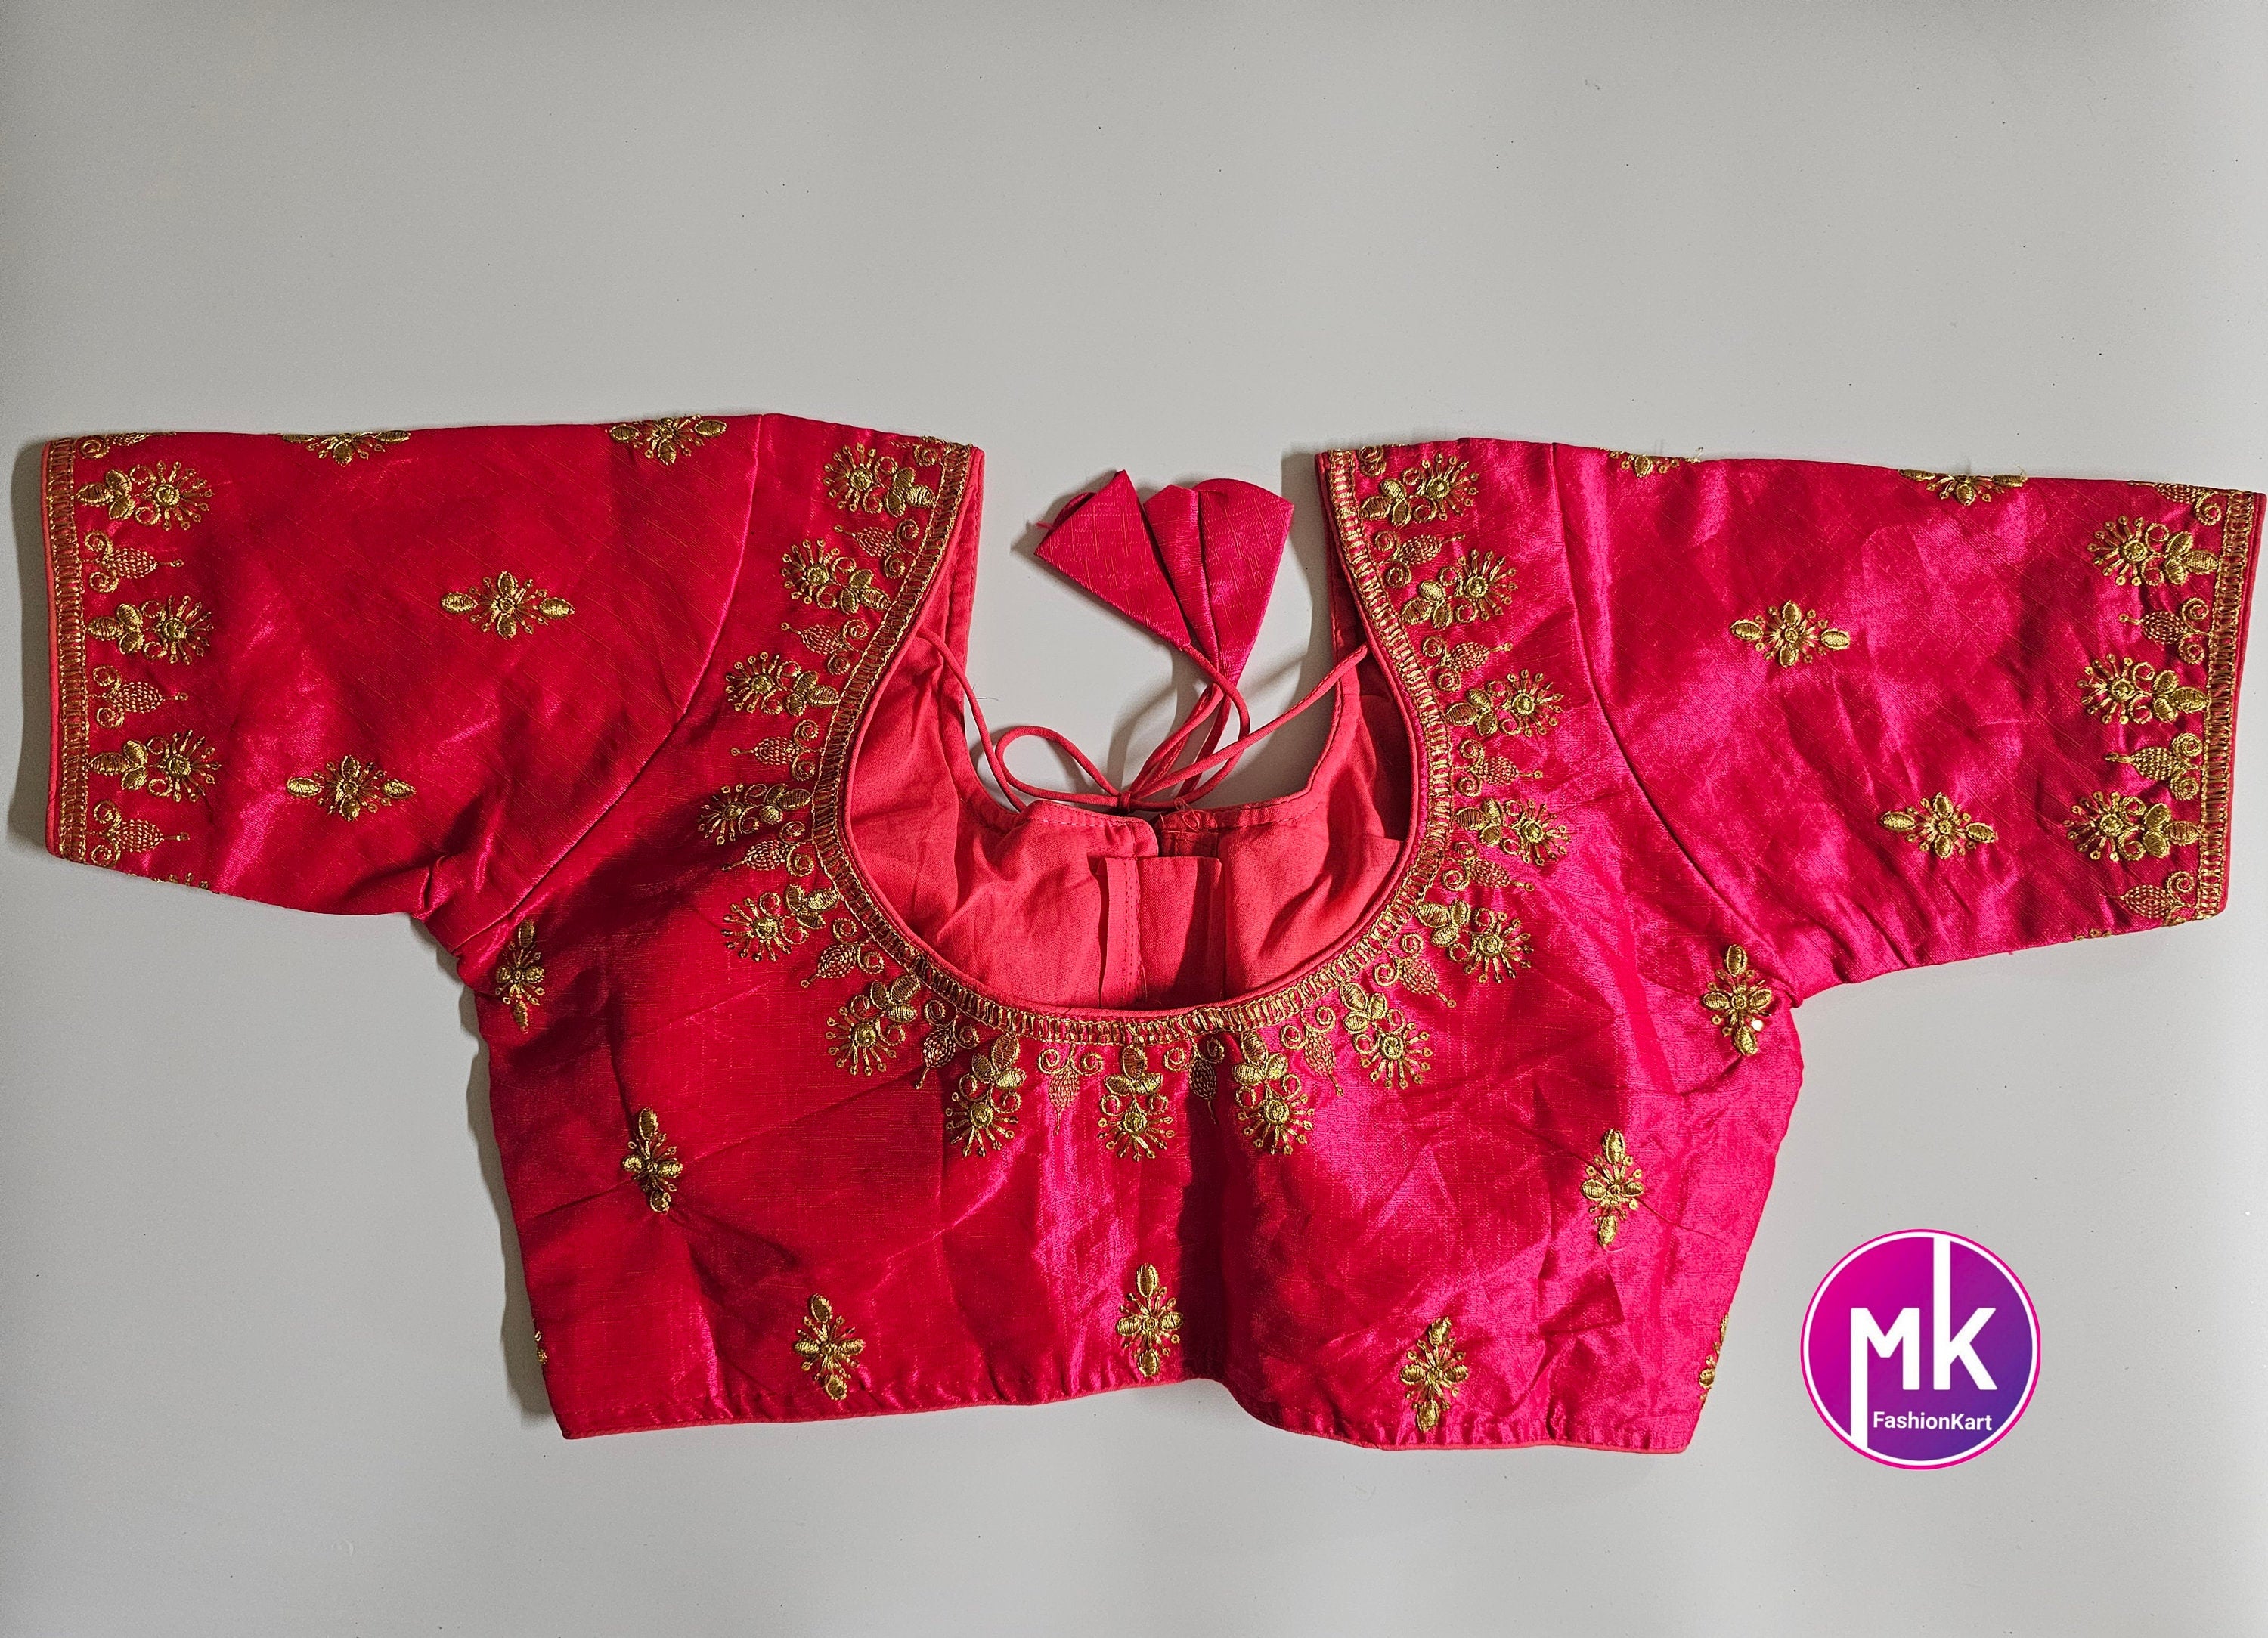 Readymade Saree Blouse - Pink color golden embroidered Blouse - Princess cut padded - size 38" (Upto 40")